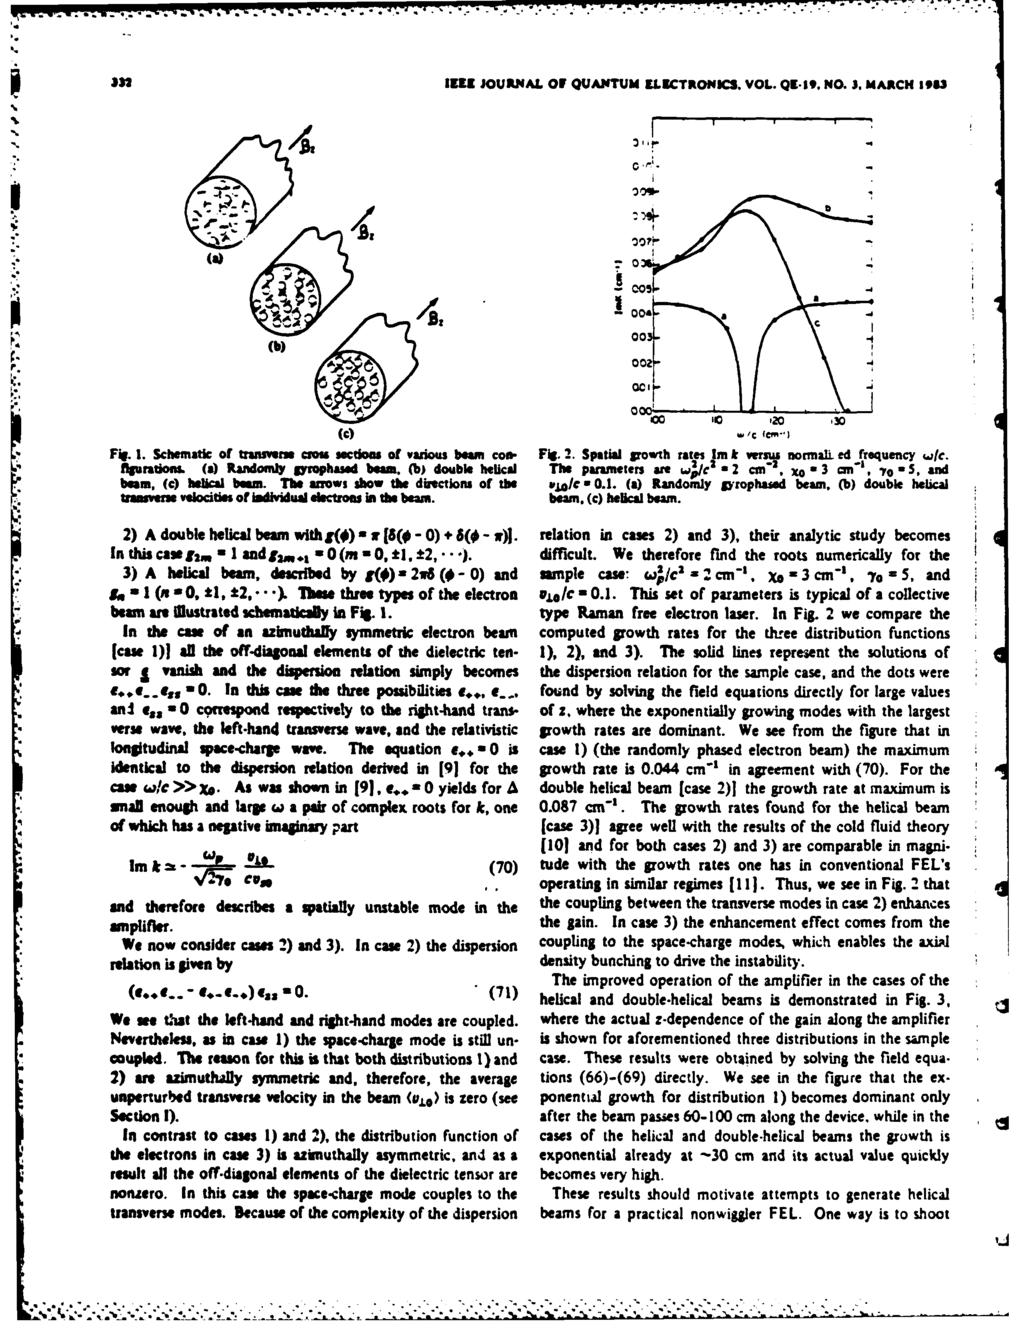 33 191" JOURINAL OF QUANTUM ELICTRONcS. VOL. QIE-19. NO. J. MARCH 3993! I I - 004f- aq (b) 03 00I- (a. ac b (he t F. fllpa 1. t:1o0" Schematic () of Rand trasvers8 n 8Ymphasd C1o1 sctuoas beam.